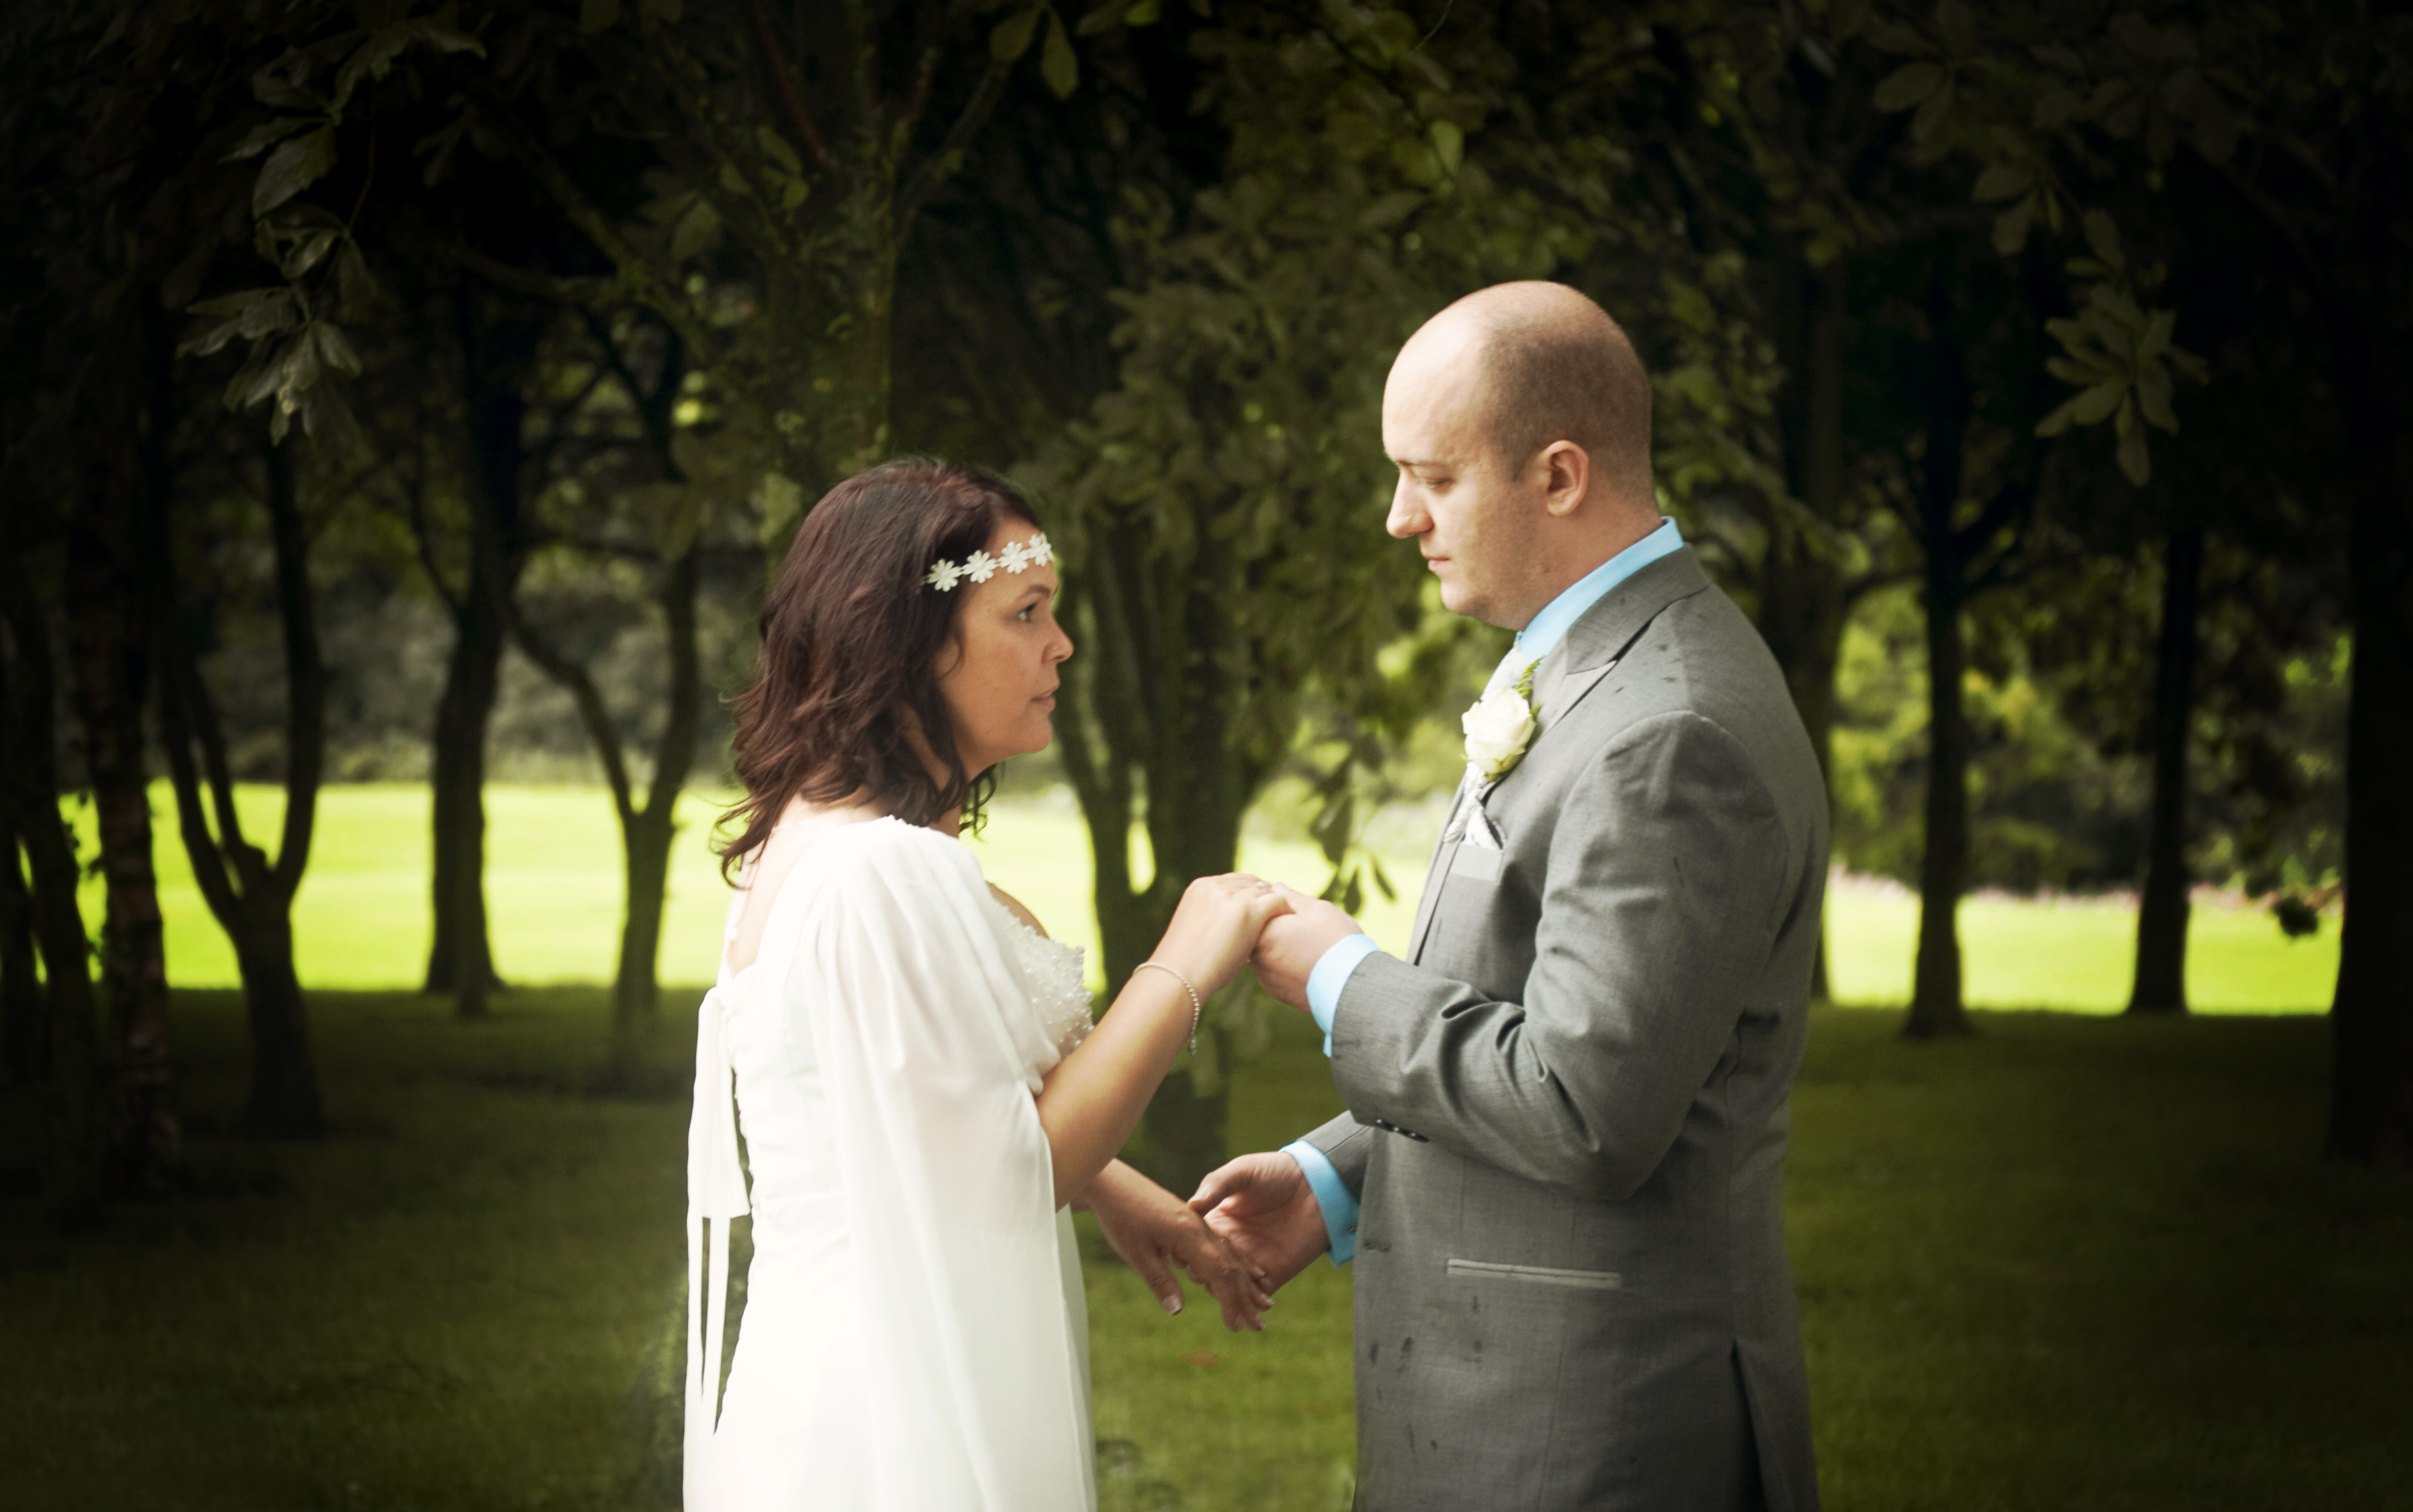 Wedding photography. Bride wearing medieval style dress holding hands with groom